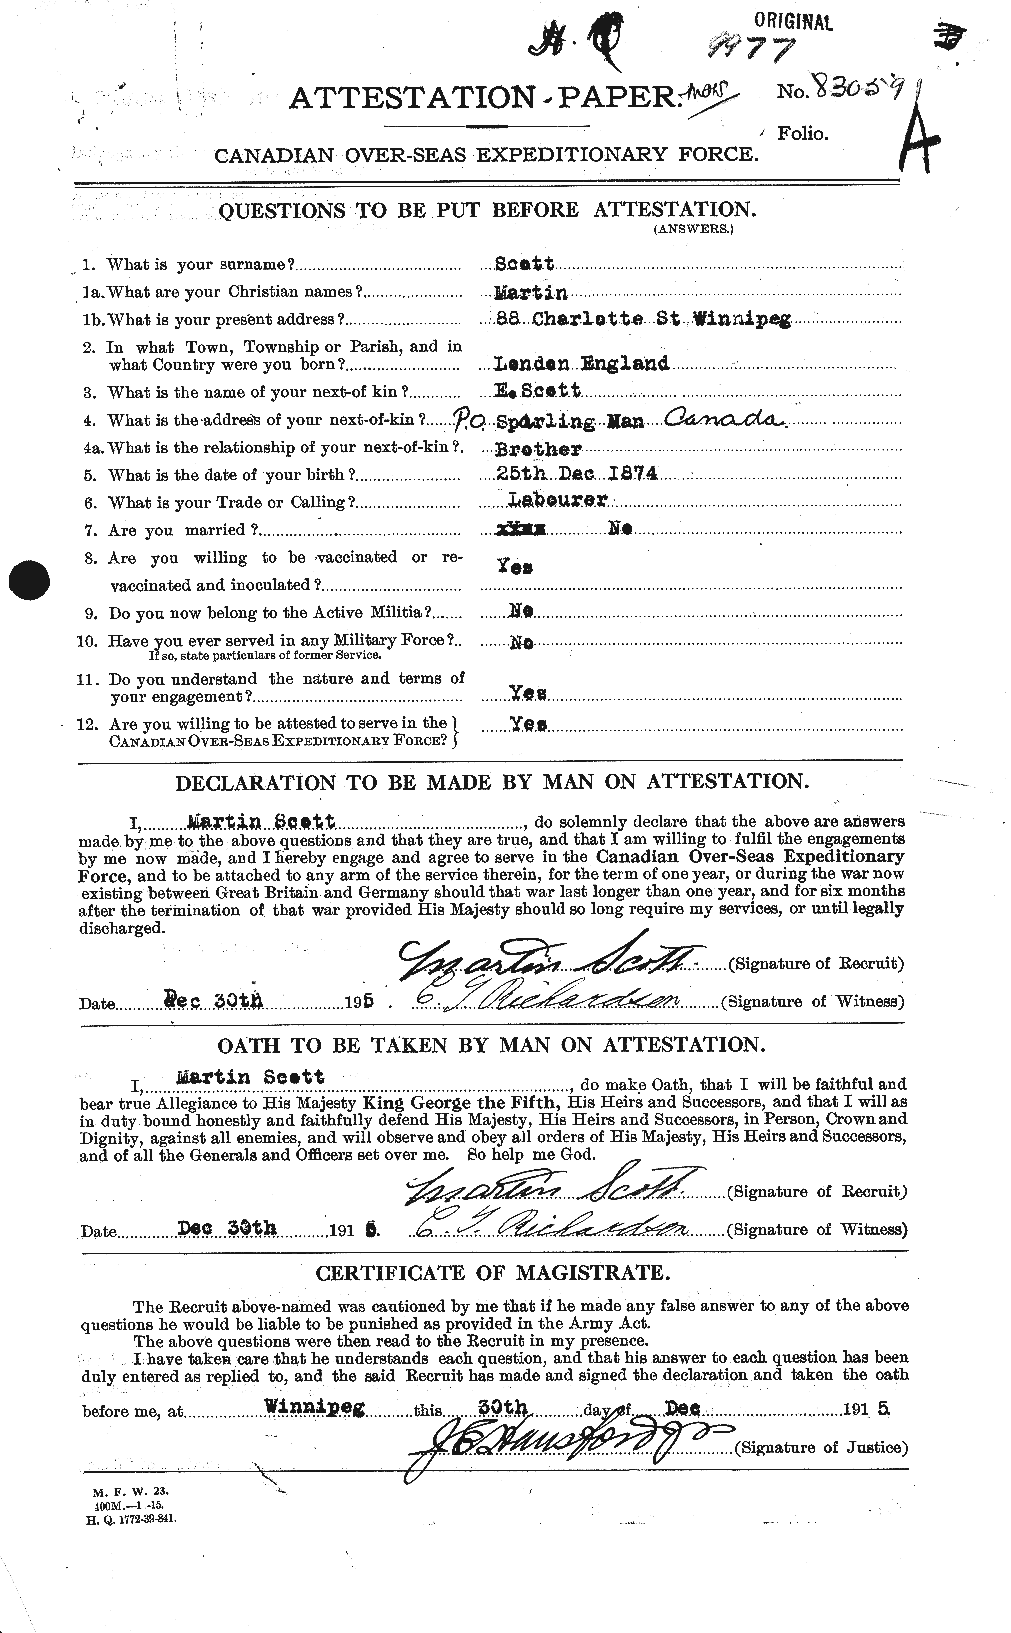 Personnel Records of the First World War - CEF 083510a